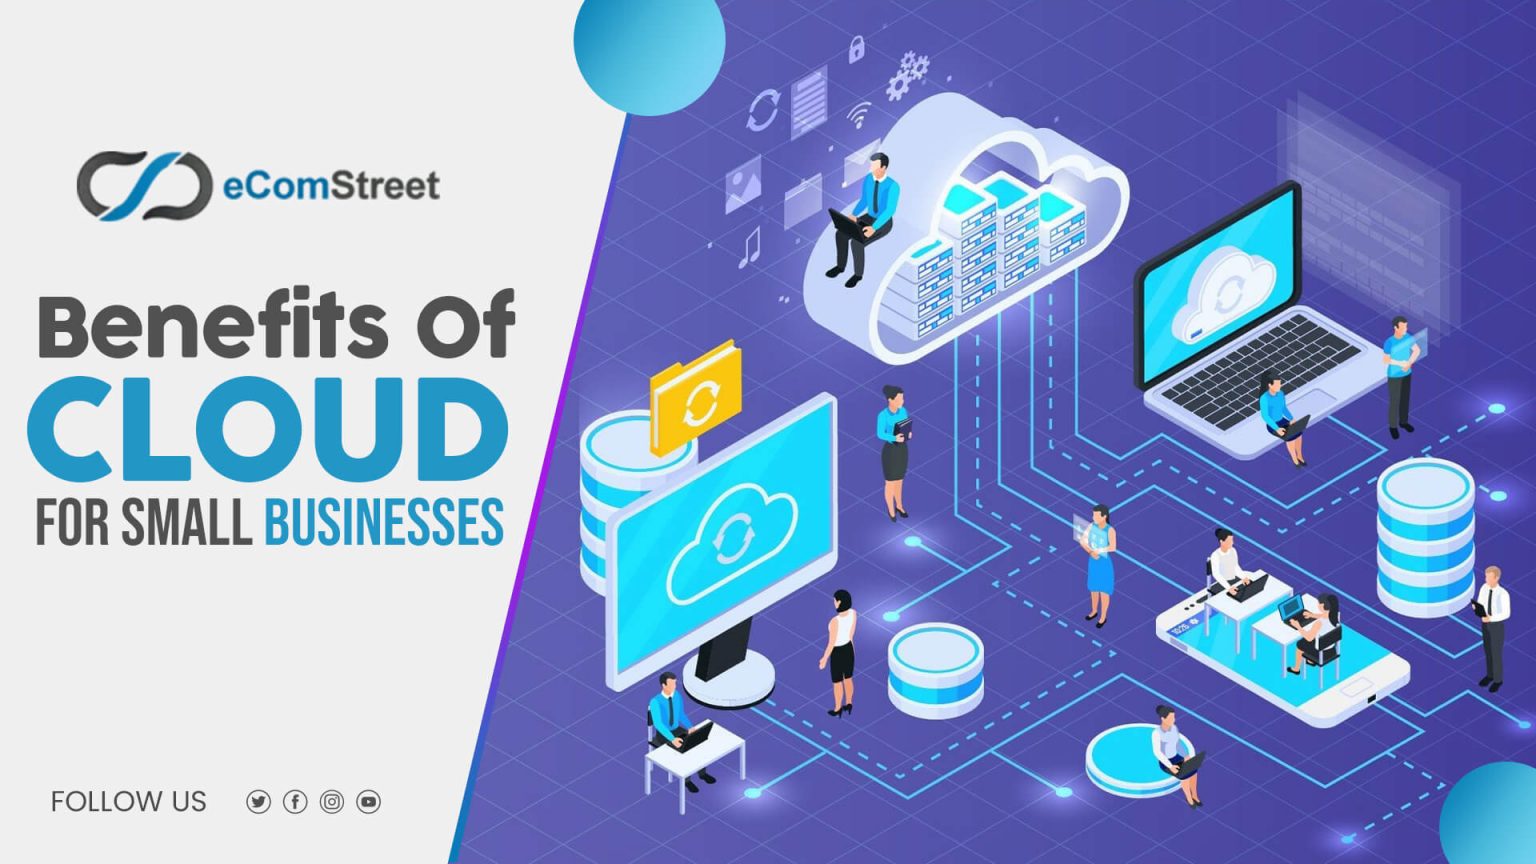 Benefits Of Cloud for Small Businesses